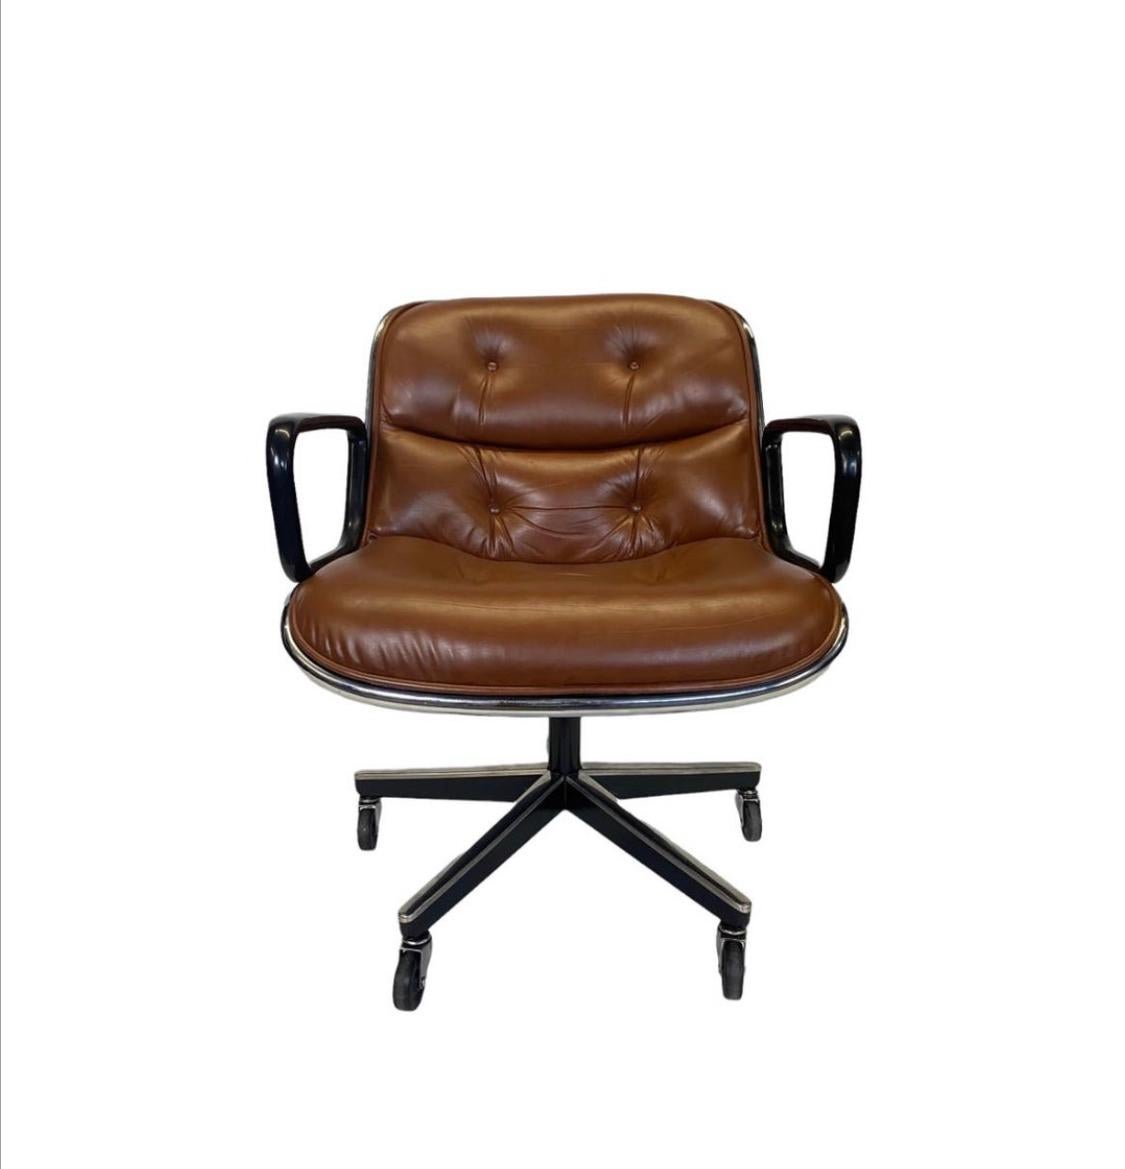 Mid-Century Modern Pollock Executive Desk Chair in Brown Leather